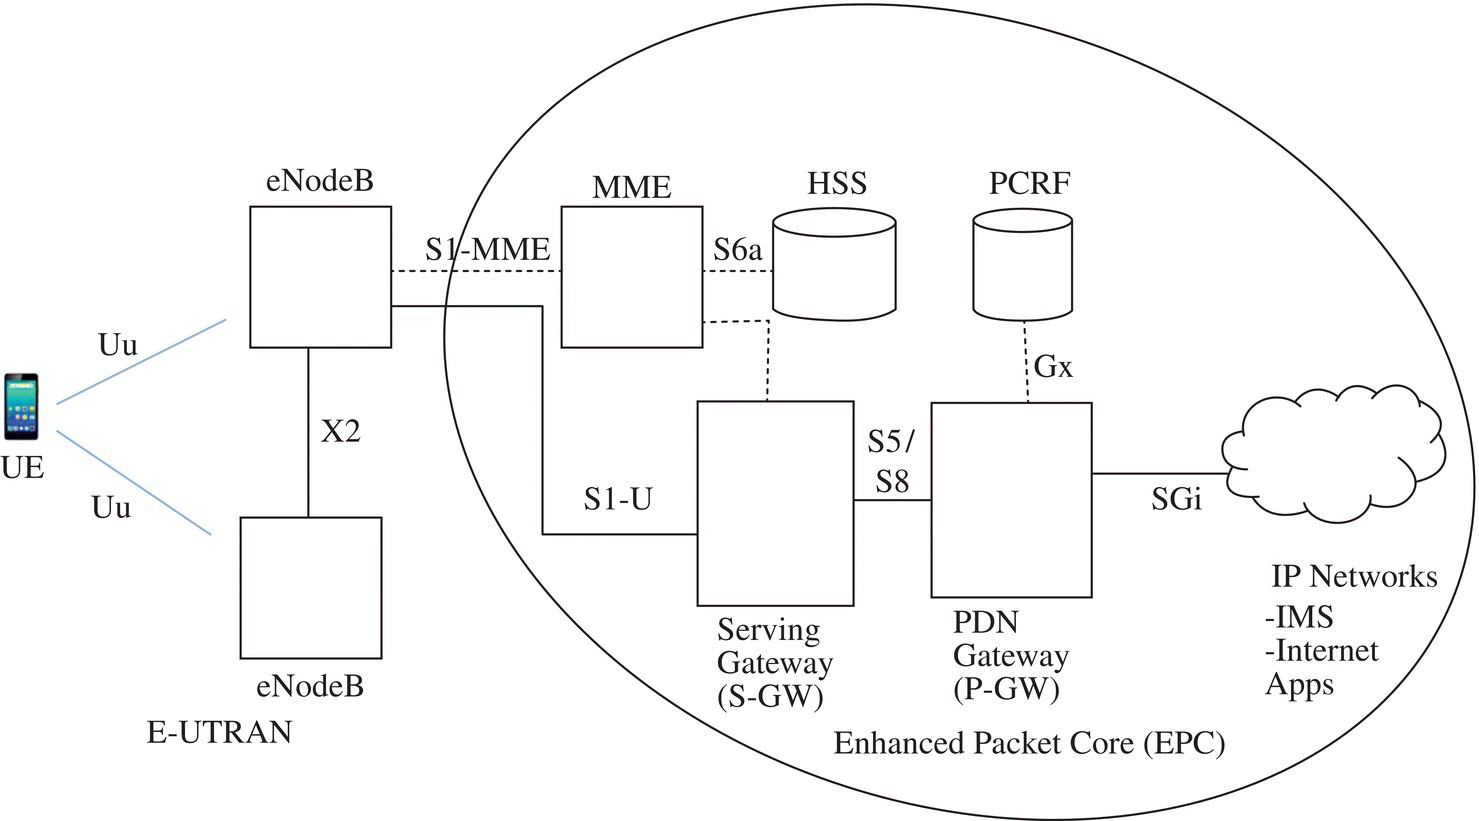 Diagram depicting the scope of LTE network planning, starting from UE to 2 eNodeBs. One of which is linked to serving gateway, to PDB gateway, and to IP networks, which are enclosed by an oval along with MMe, HSS, and PCRF.